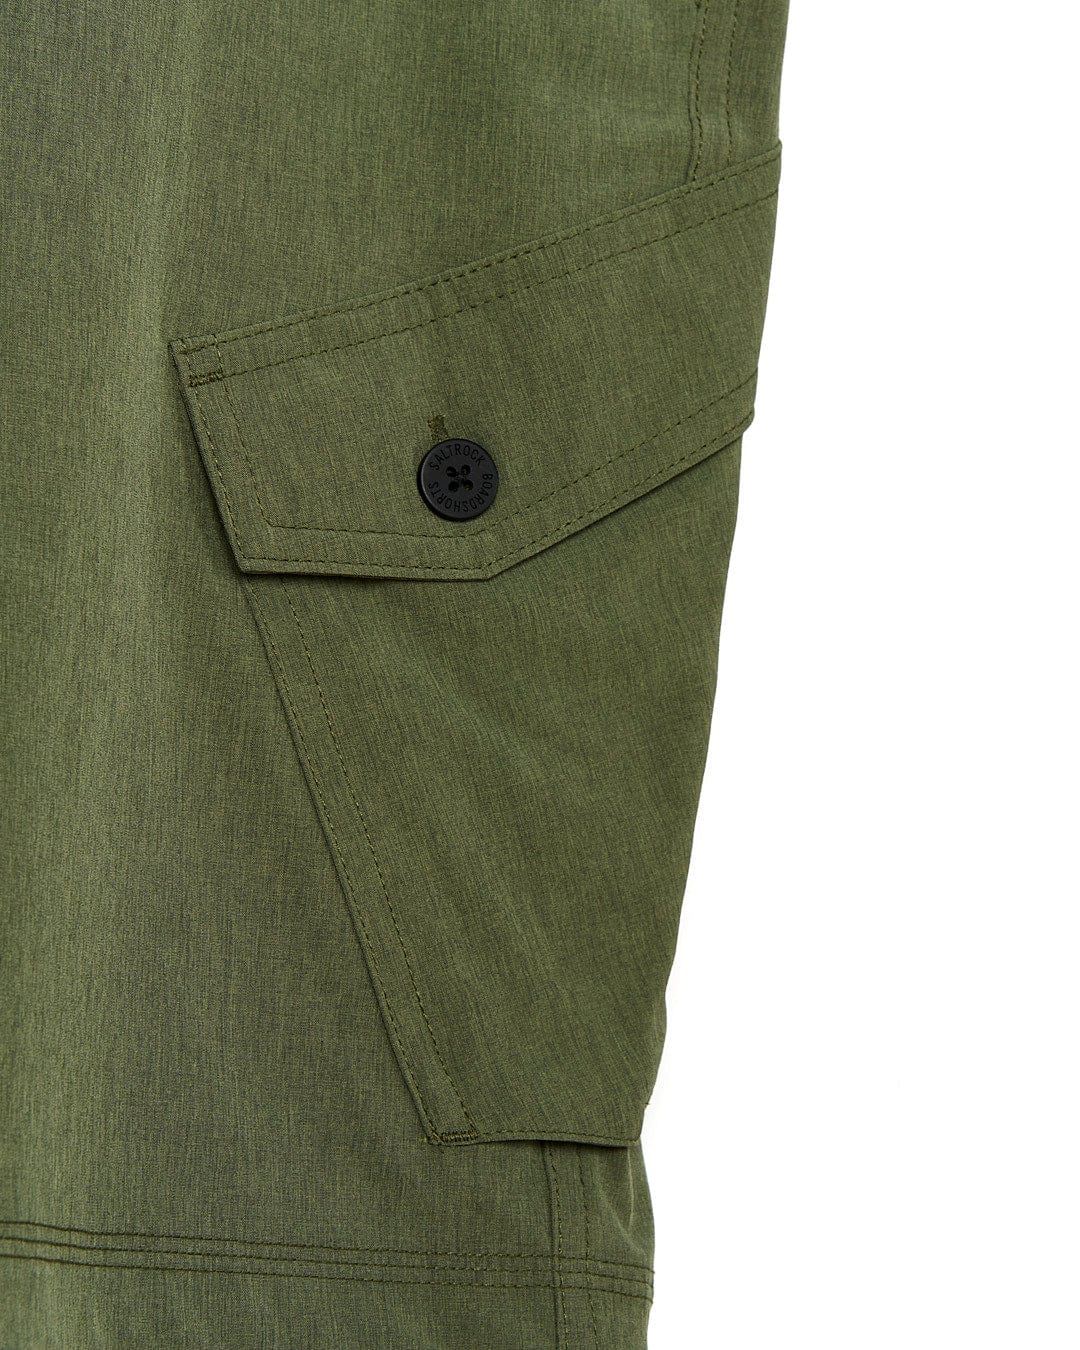 A pair of Saltrock's Cargo Amphibian II - Mens Boardshort - Dark Green with a pocket on the side.